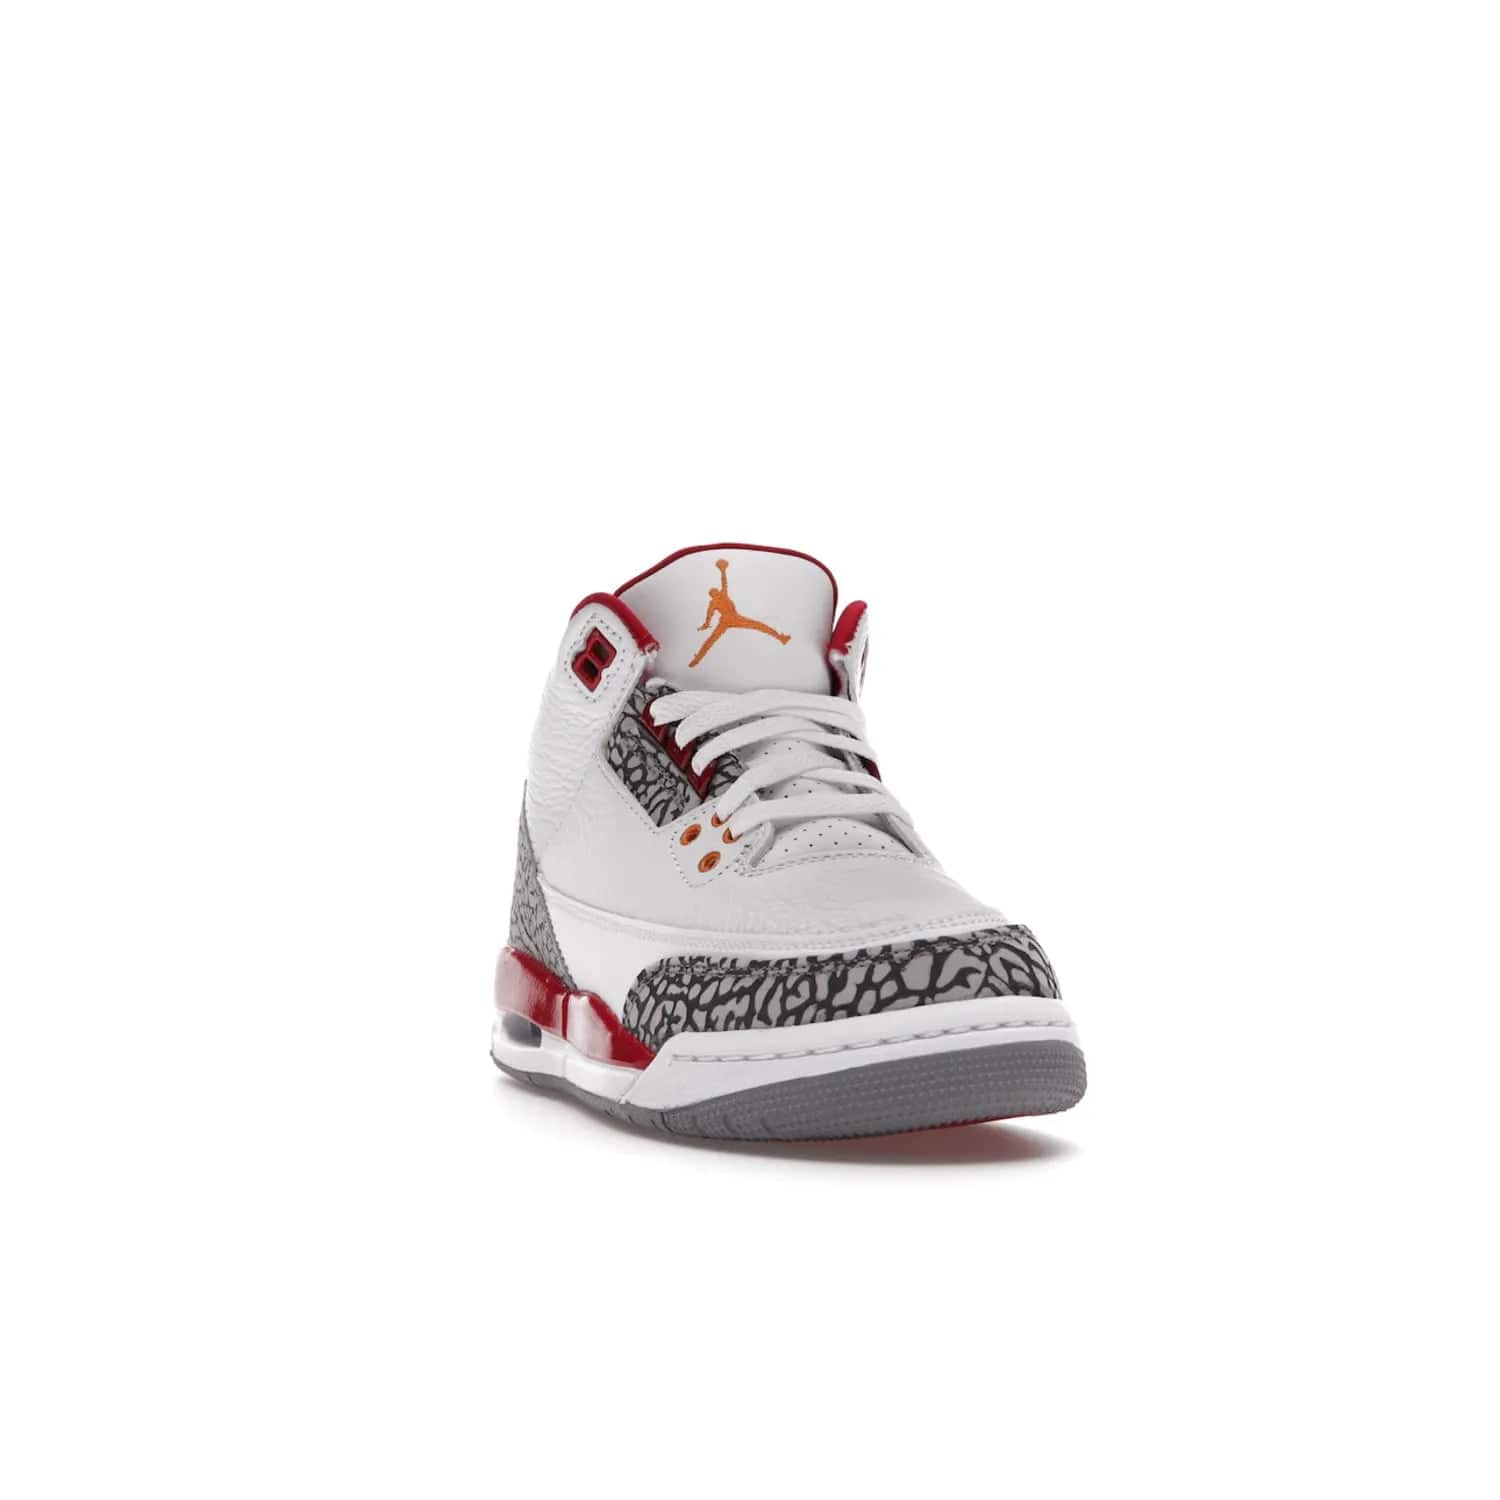 Jordan 3 Retro Cardinal (GS) - Image 8 - Only at www.BallersClubKickz.com - Shop the kid-sized Air Jordan 3 Retro Cardinal GS, released Feb 2022. White tumbled leather upper, light curry accenting, cement grey and classic red details throughout. Visible Air cushioning, midsole, and an eye-catching outsole. Show off your style with this fashionable streetwear silhouette.